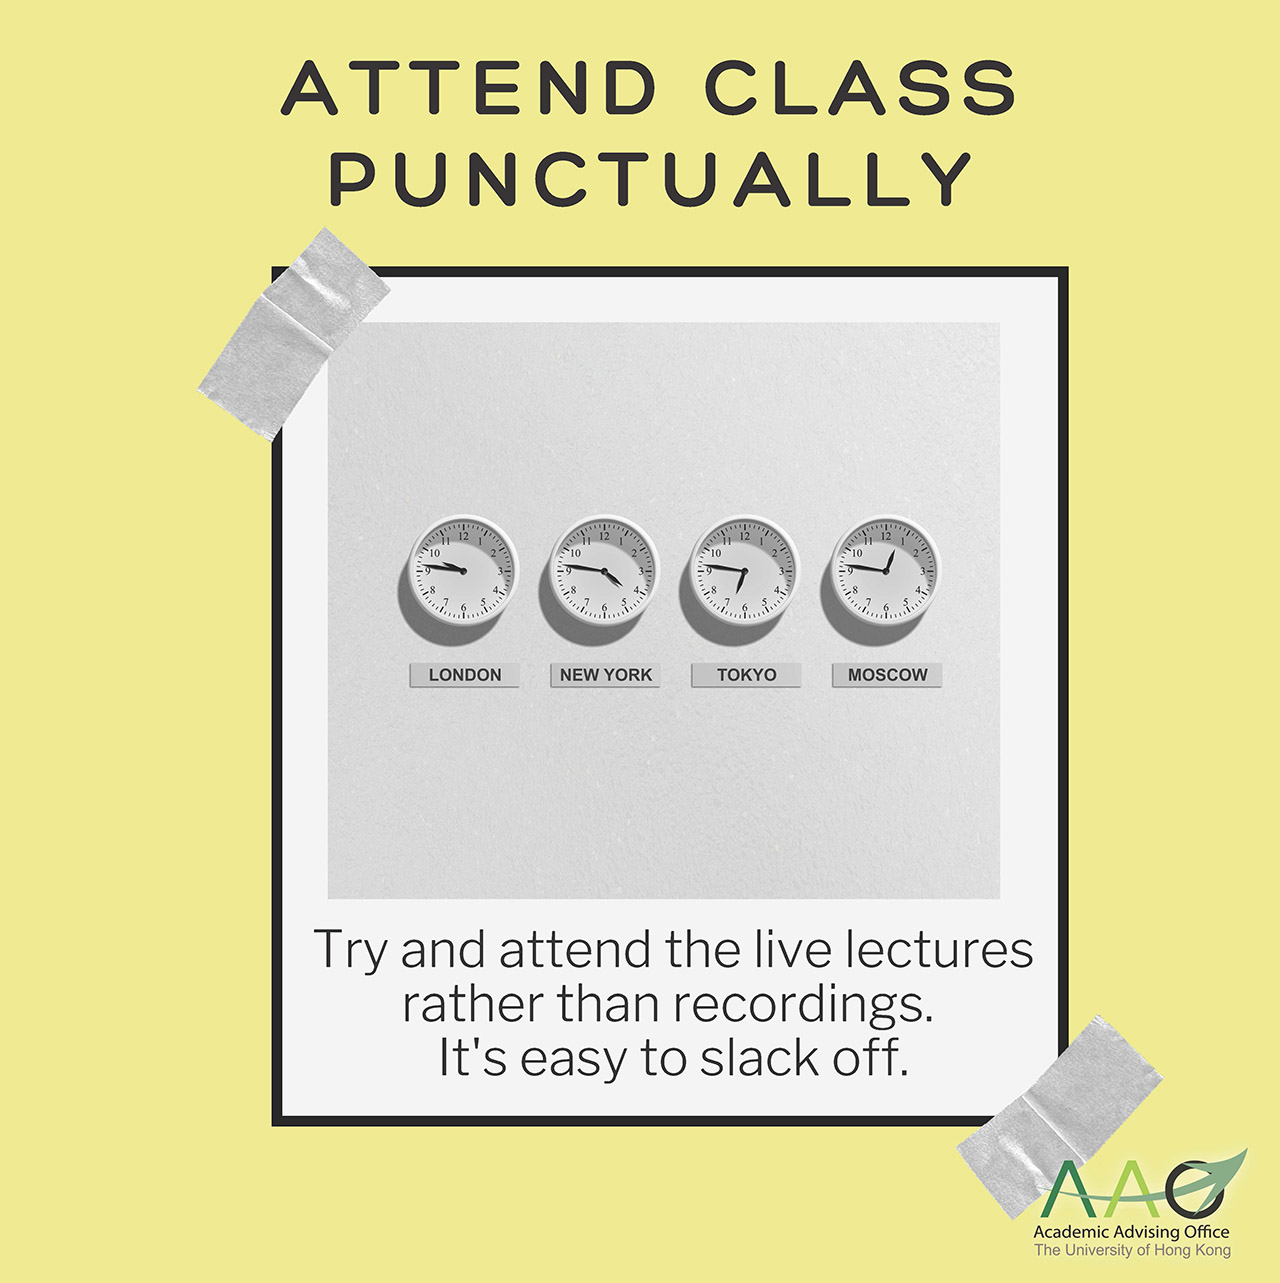 Attend class punctually: Try and attend the live lectures rather than recordings. It's easy to slack off.